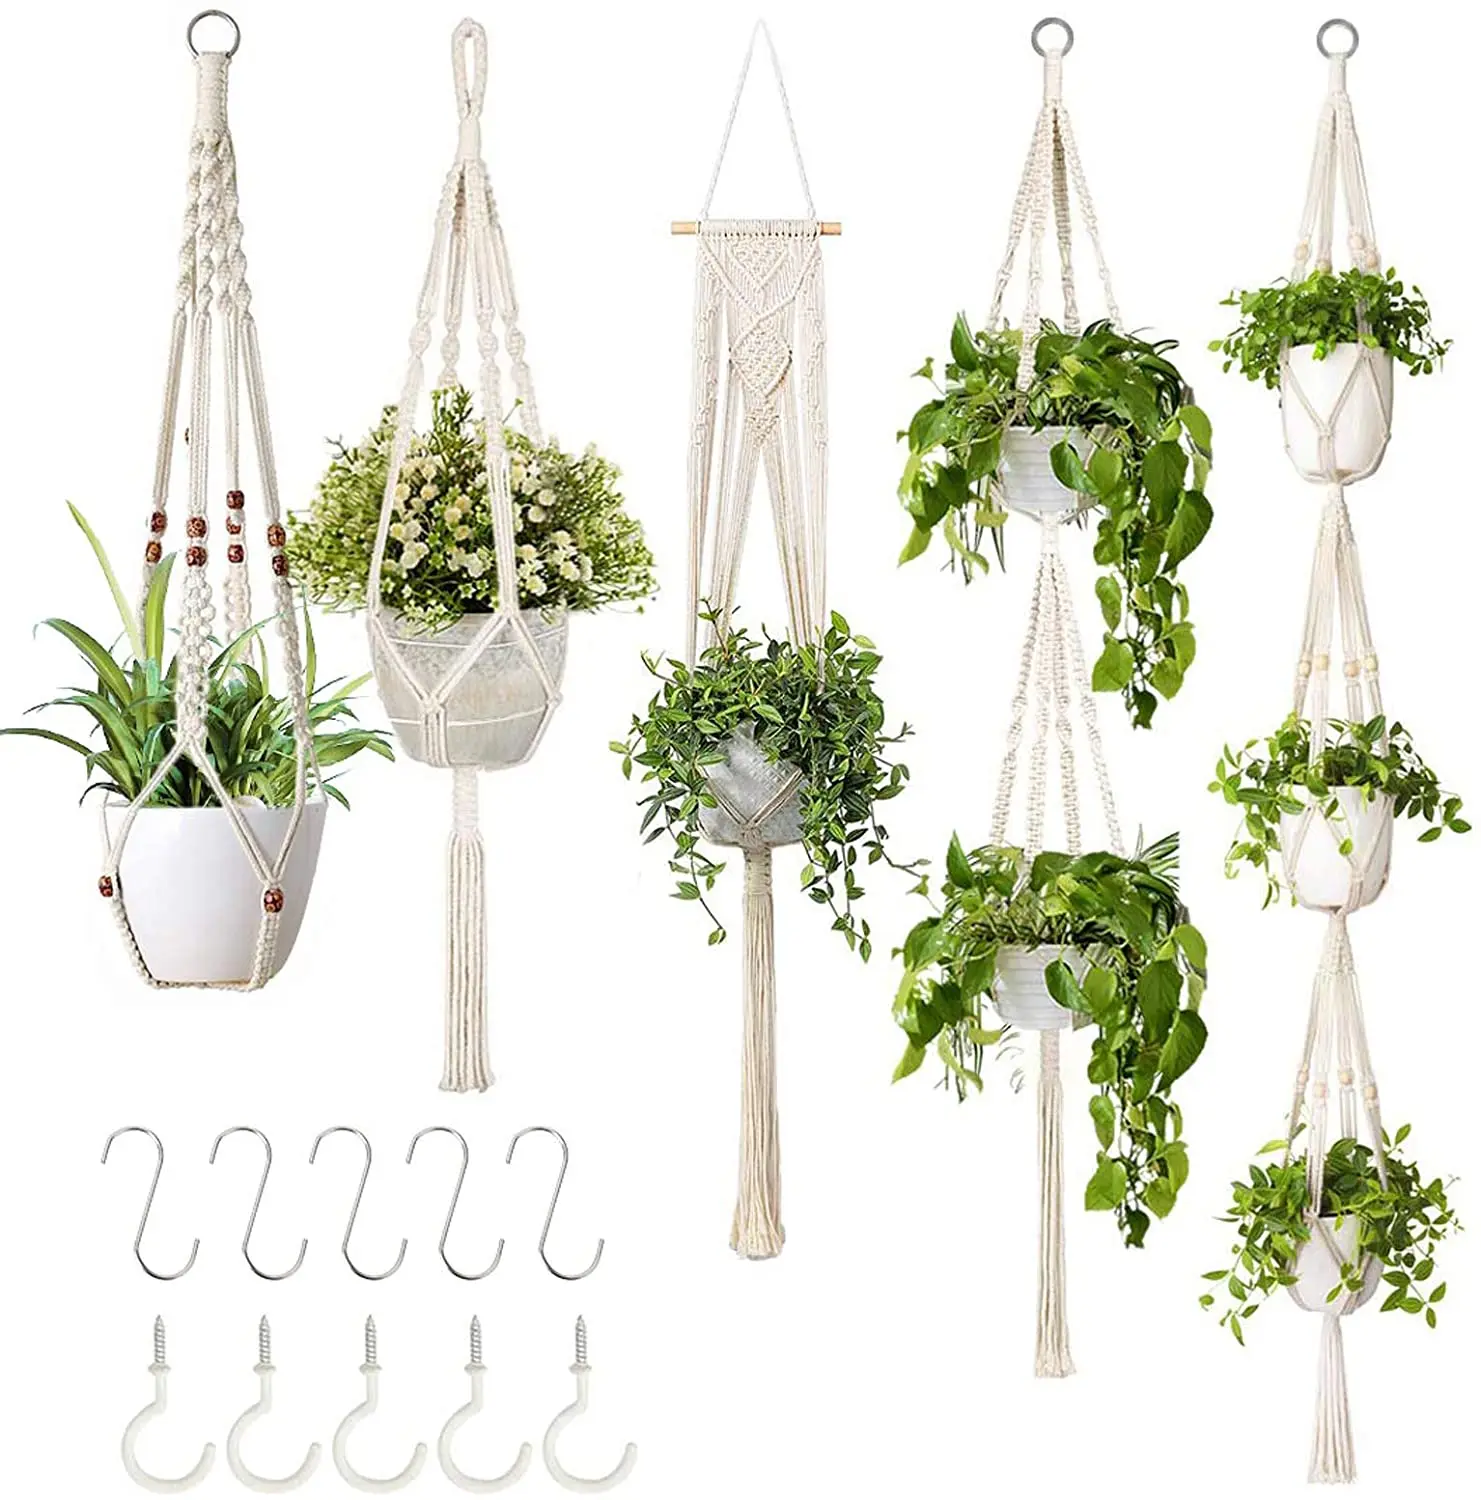 

Macrame Pot Holder Cord Woven Plant Hanger by Using Materials for Macrame, Natural